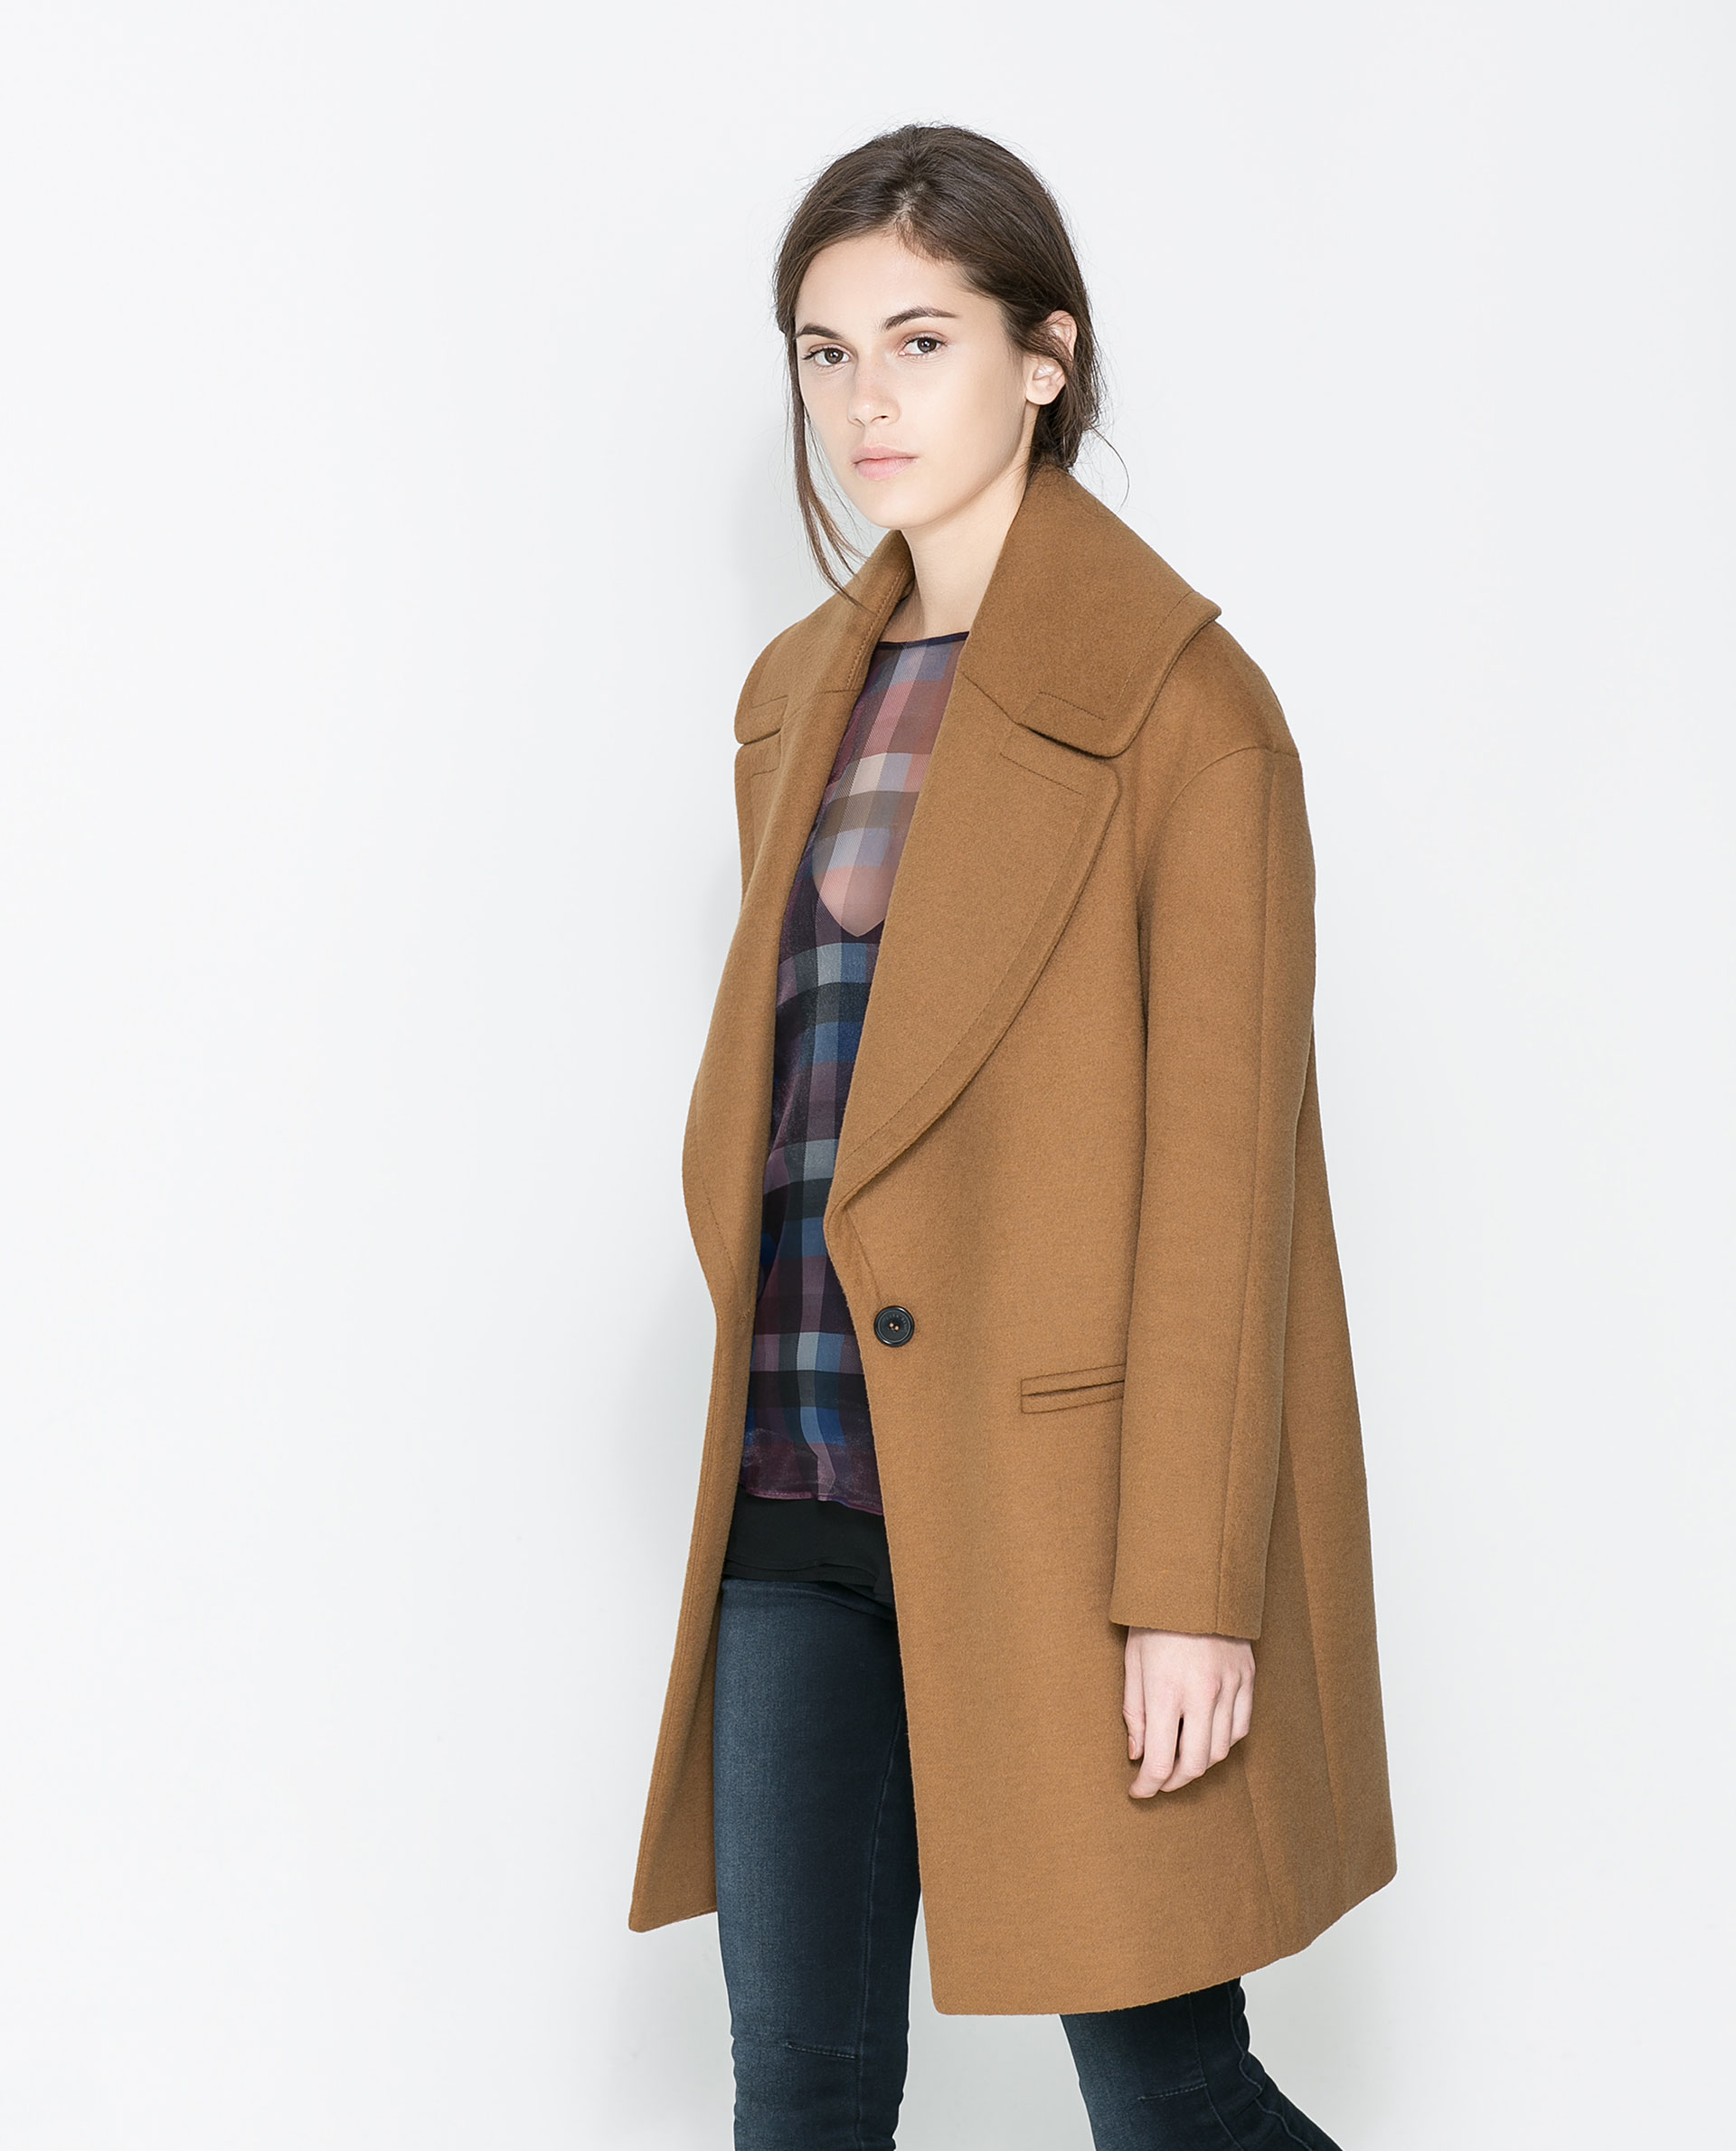 Zara Coat with Large Lapel in Natural | Lyst